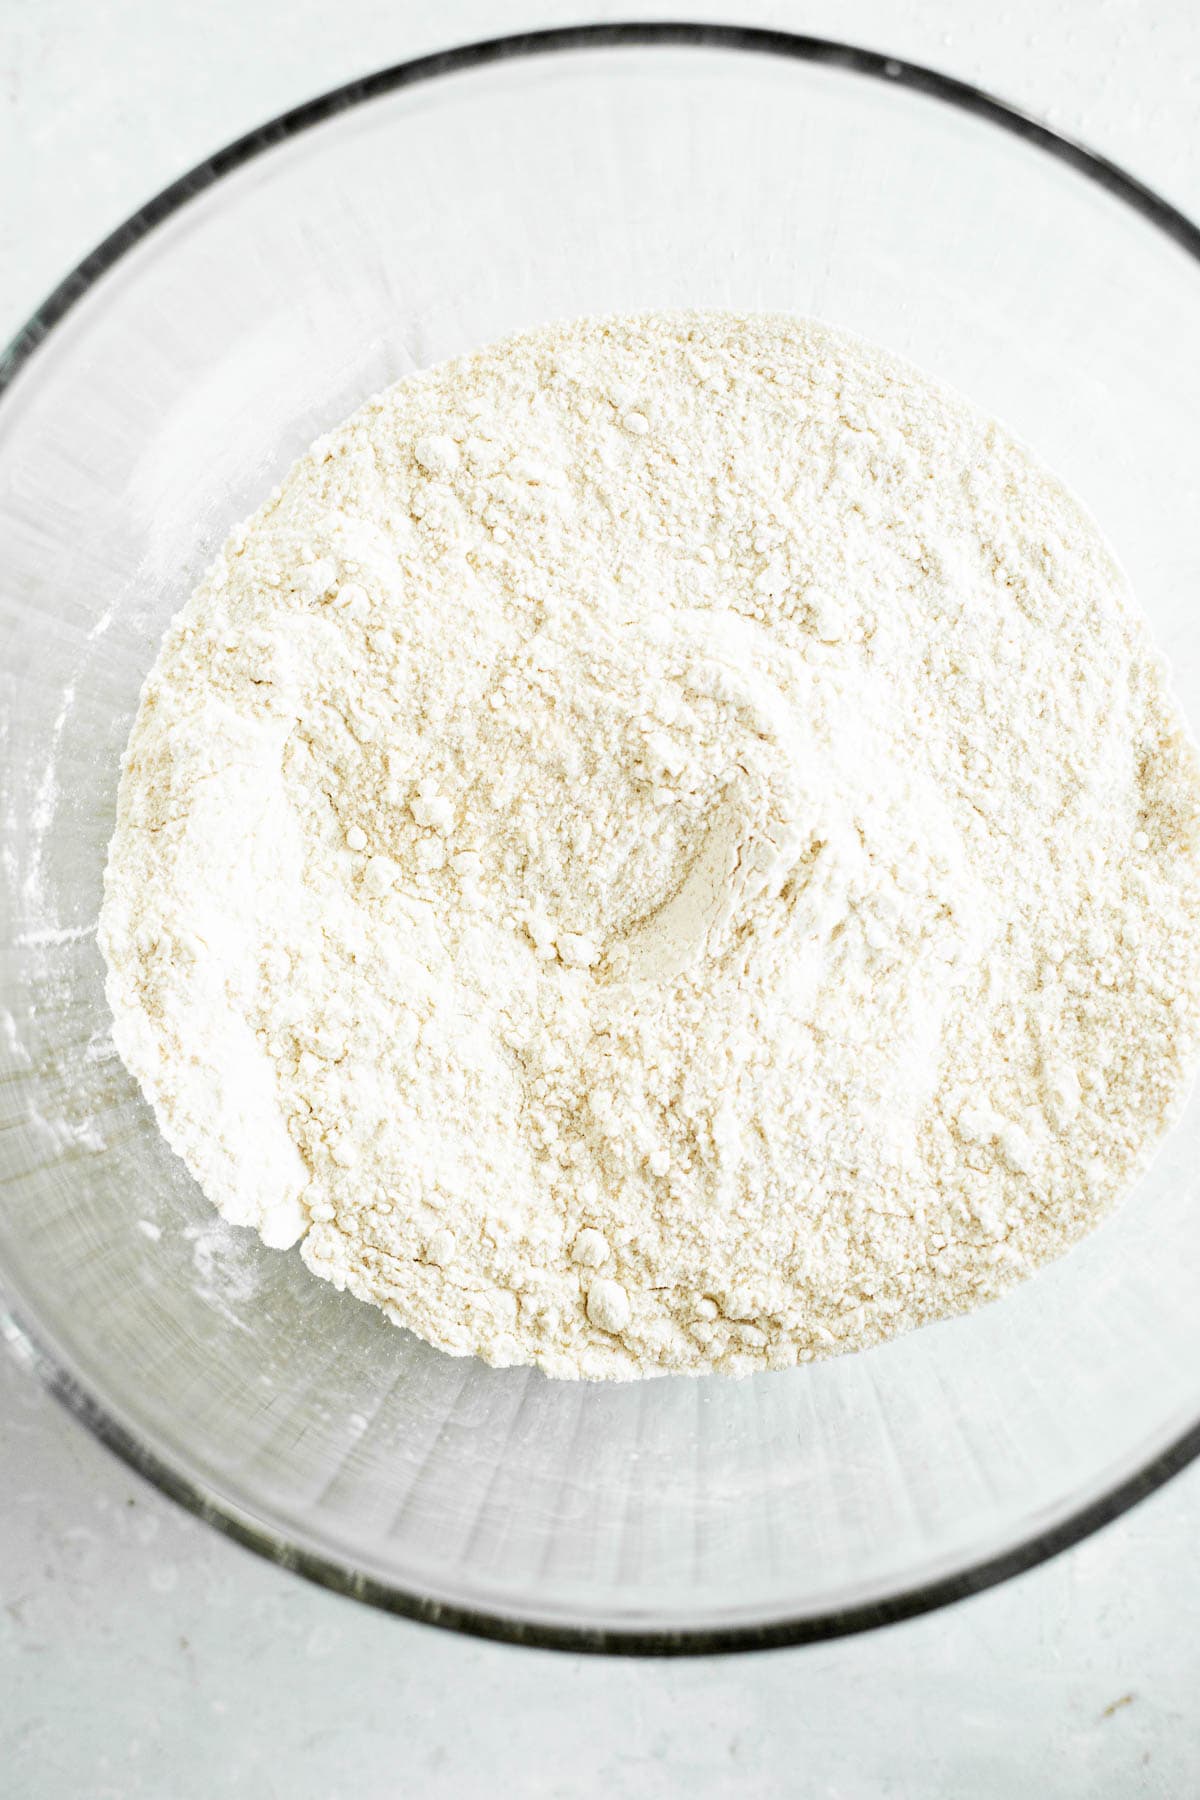 whisked flour and sugar in a glass bowl.